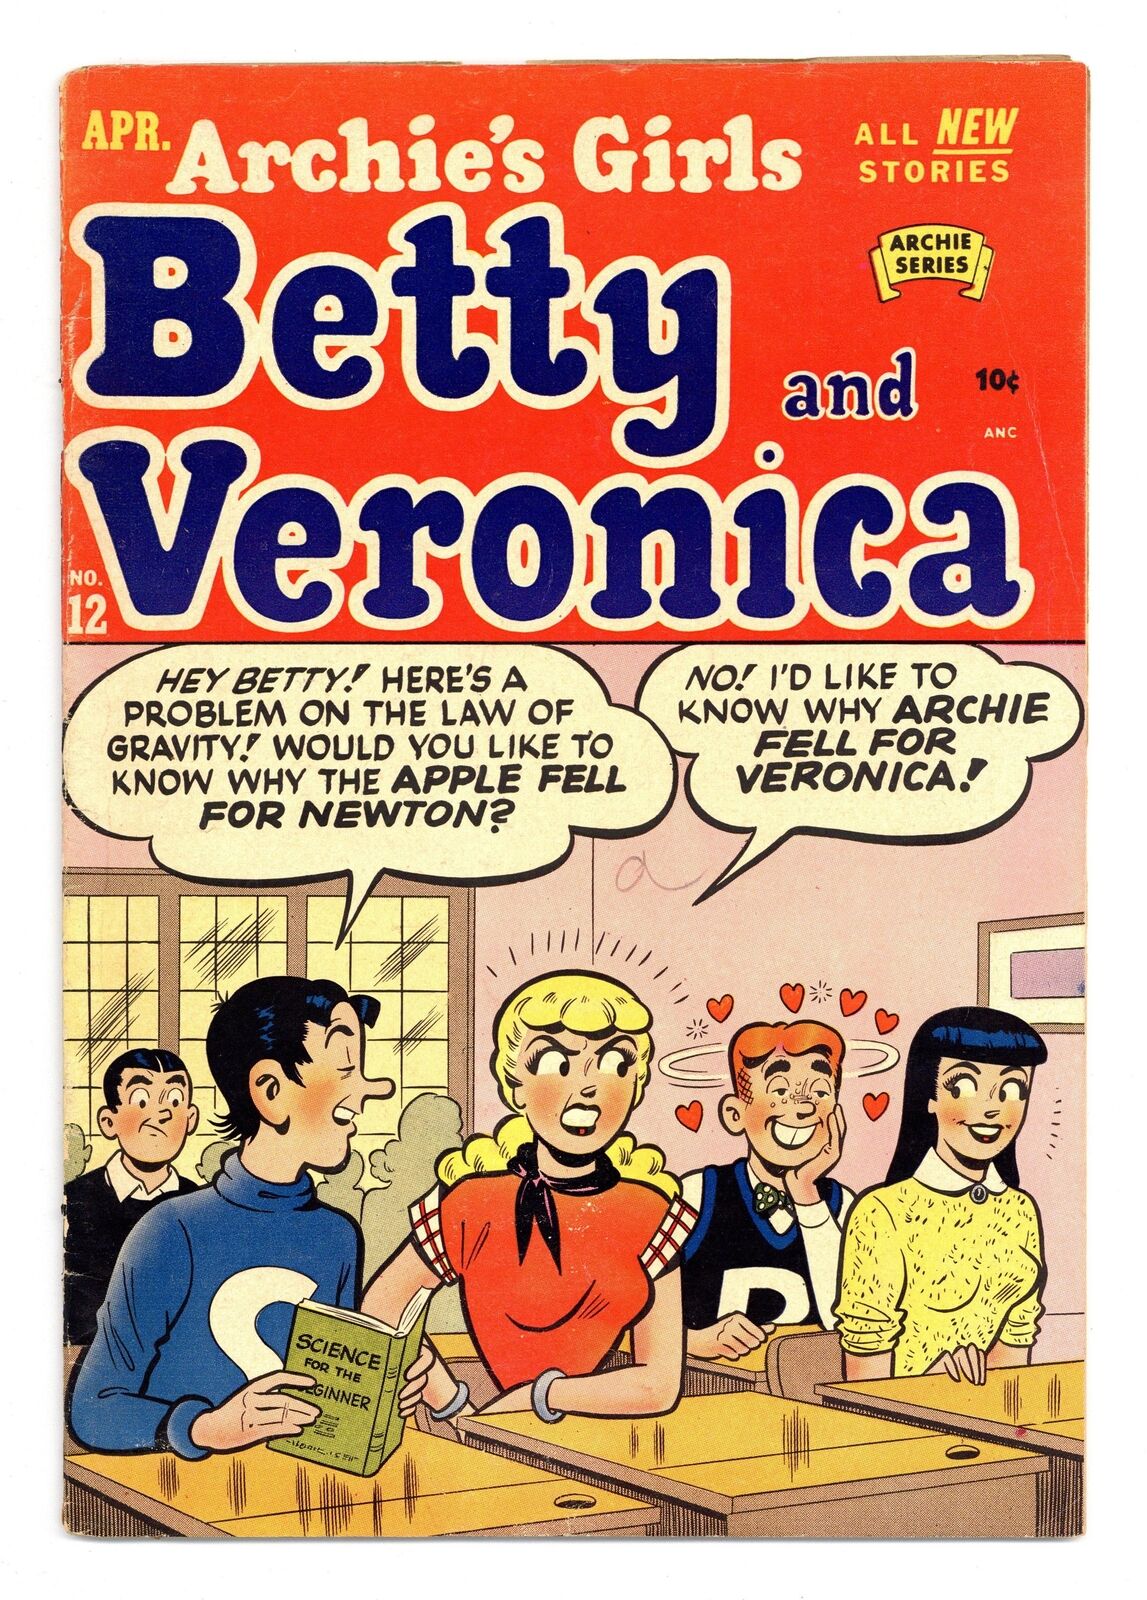 Archie\'s Girls Betty and Veronica #12 VG 4.0 1954